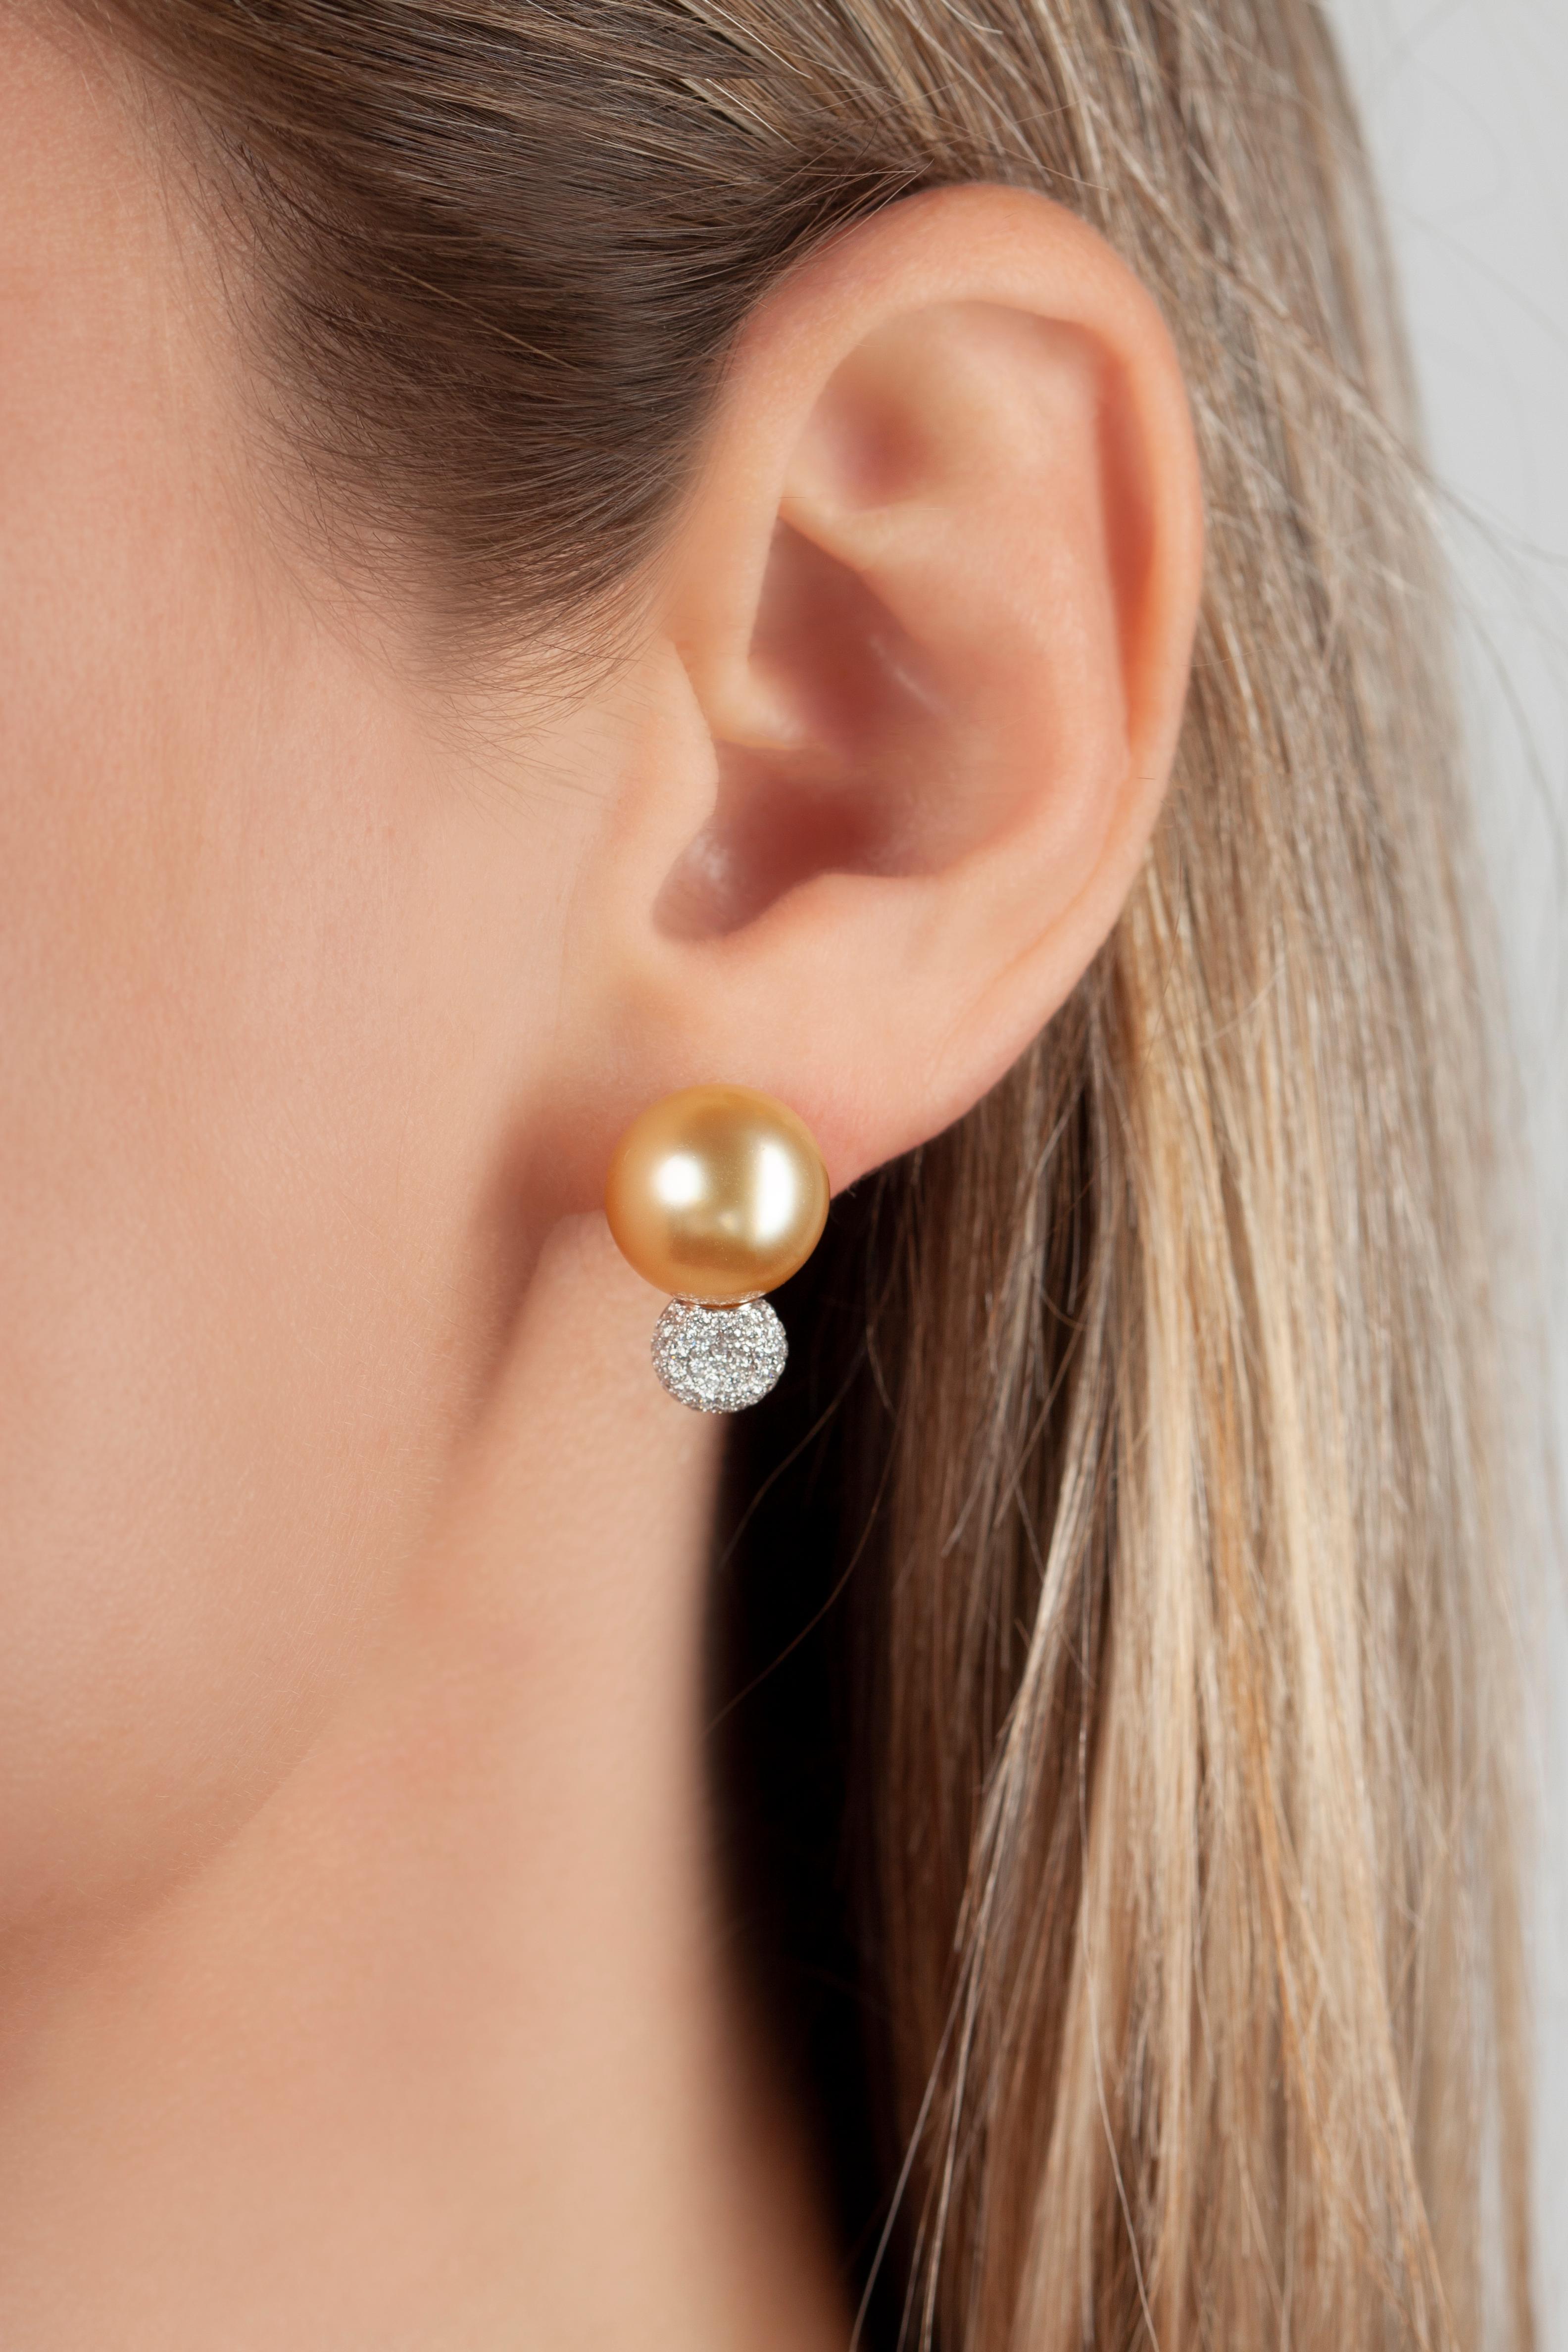 These spectacular earrings by Yoko London feature vivid Golden South Sea pearls sat atop a scintillating cluster of diamonds. The rarest of all pearl varieties, the Golden South Sea pearls featured in these earrings have been matched and